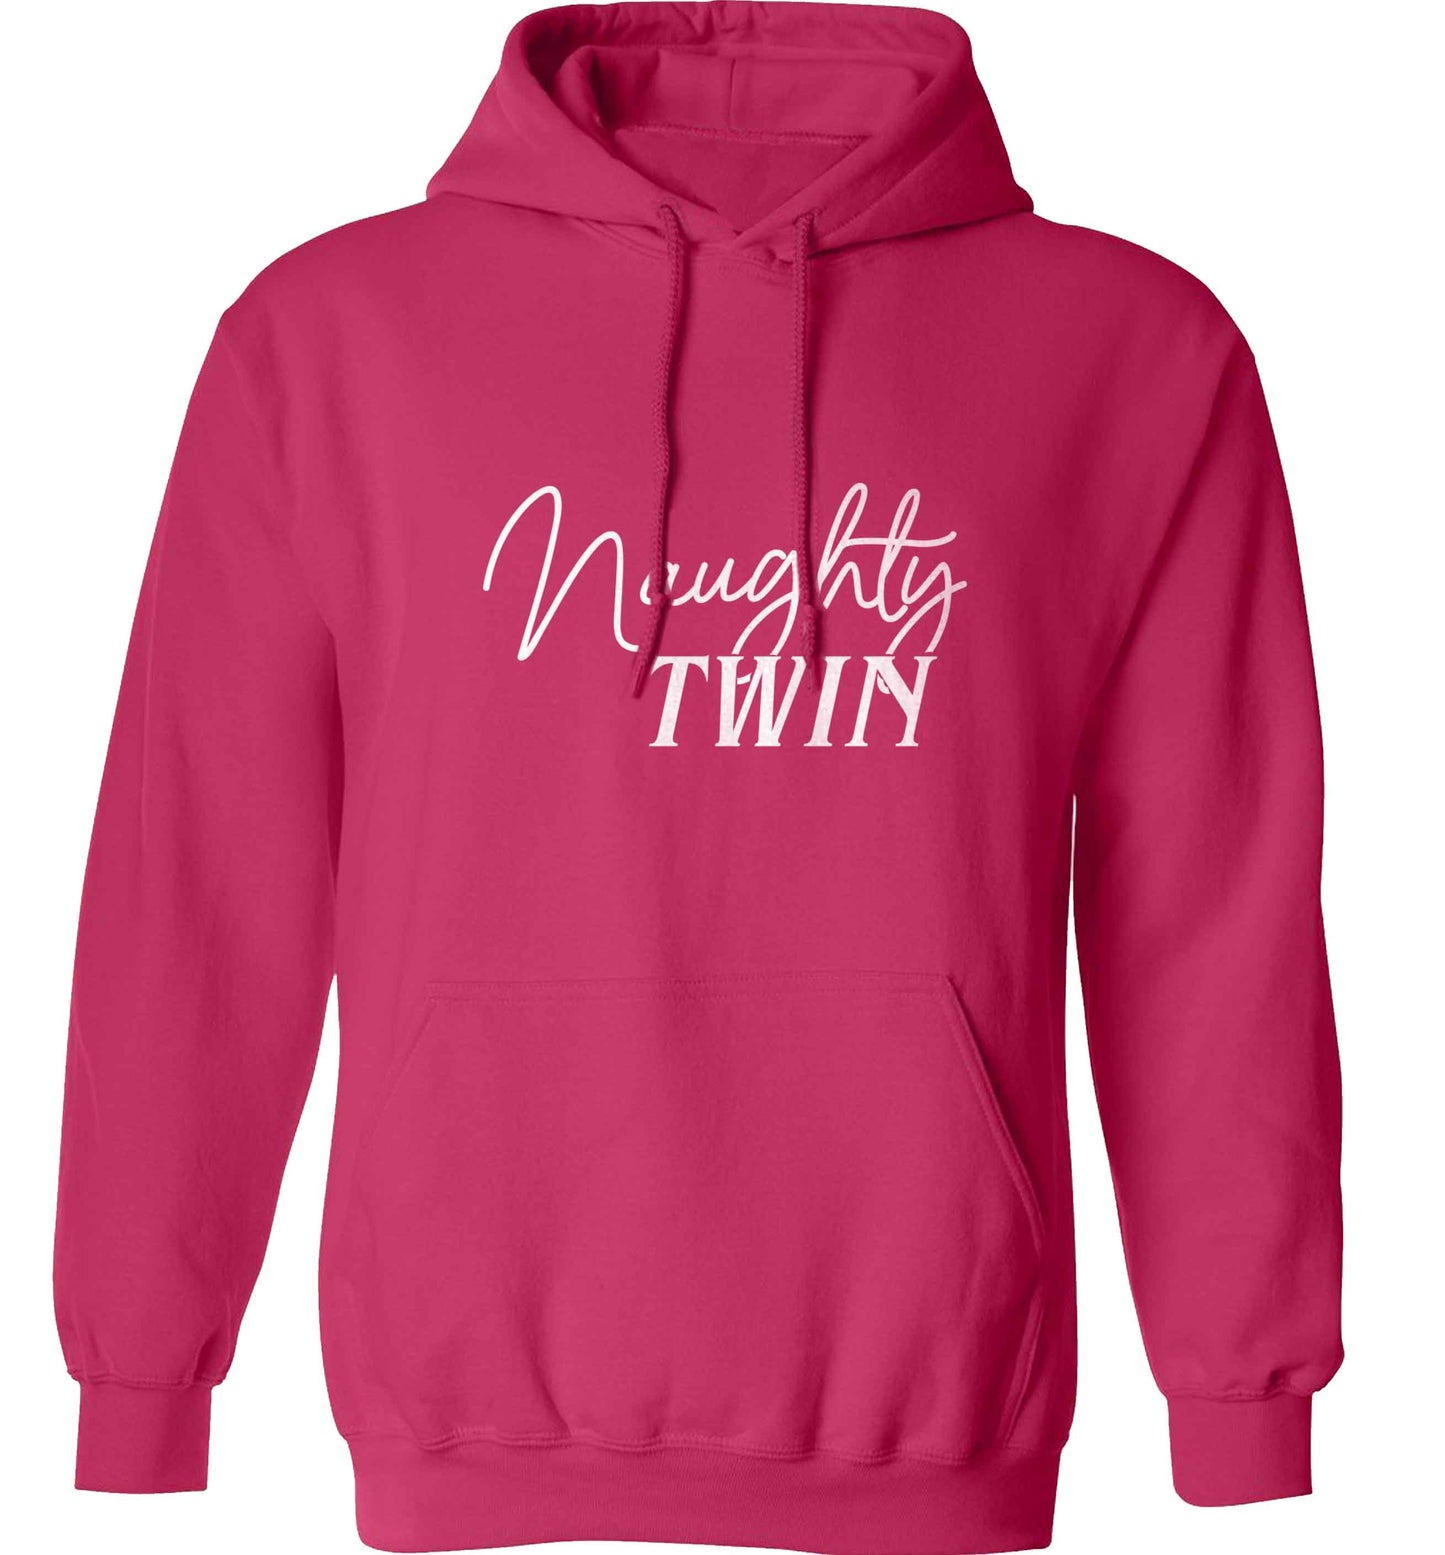 Naughty twin adults unisex pink hoodie 2XL